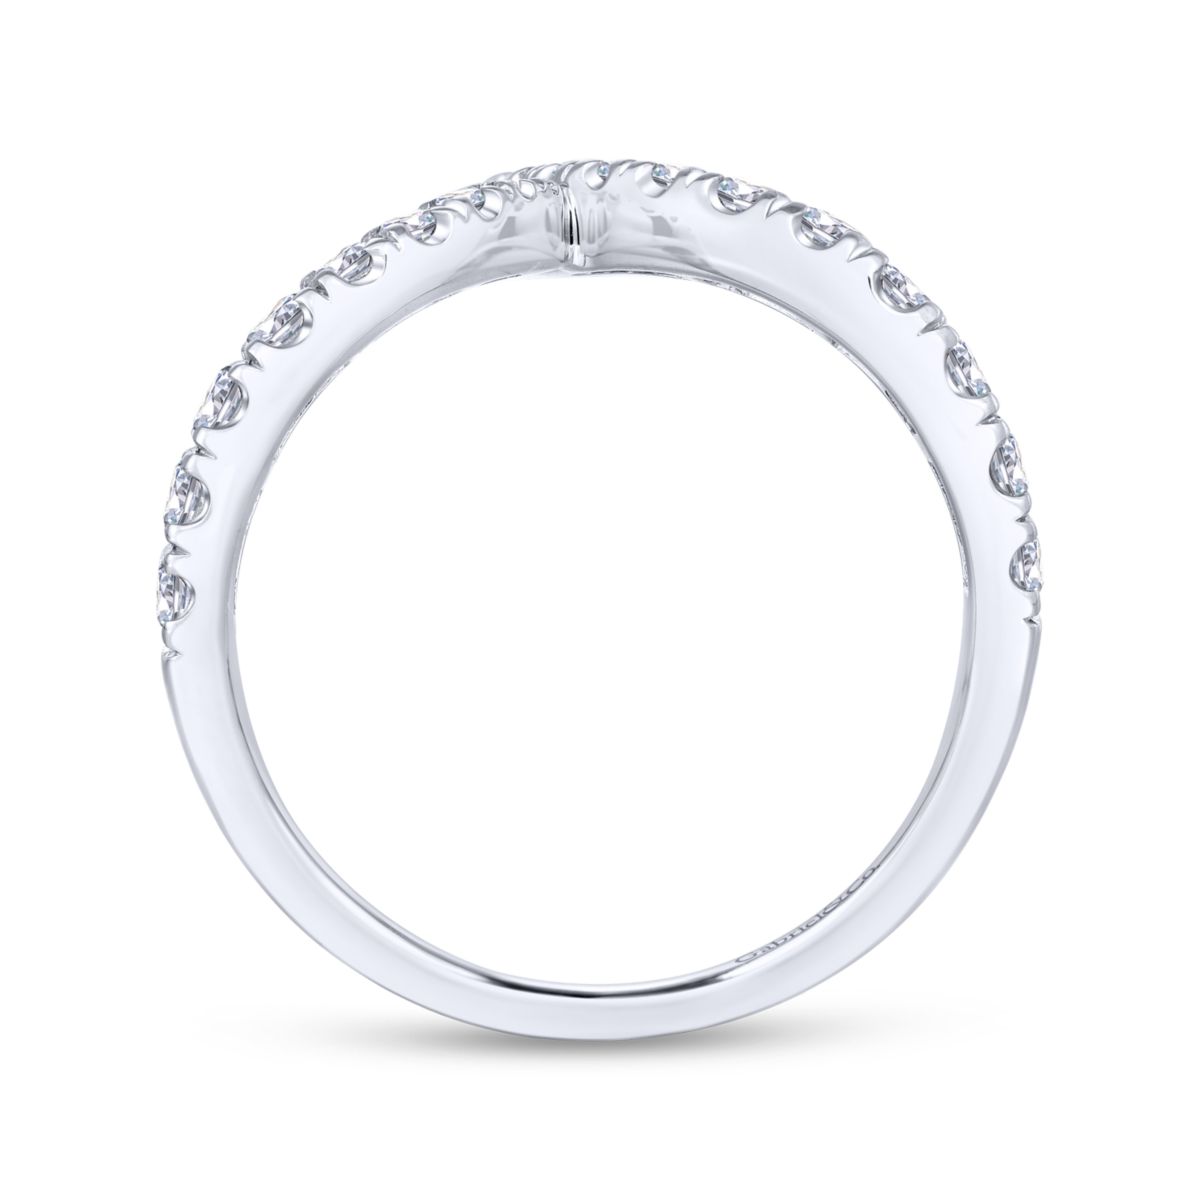 V-Shaped Diamond Ring in 14k White Gold - Side View - Long Island, NY